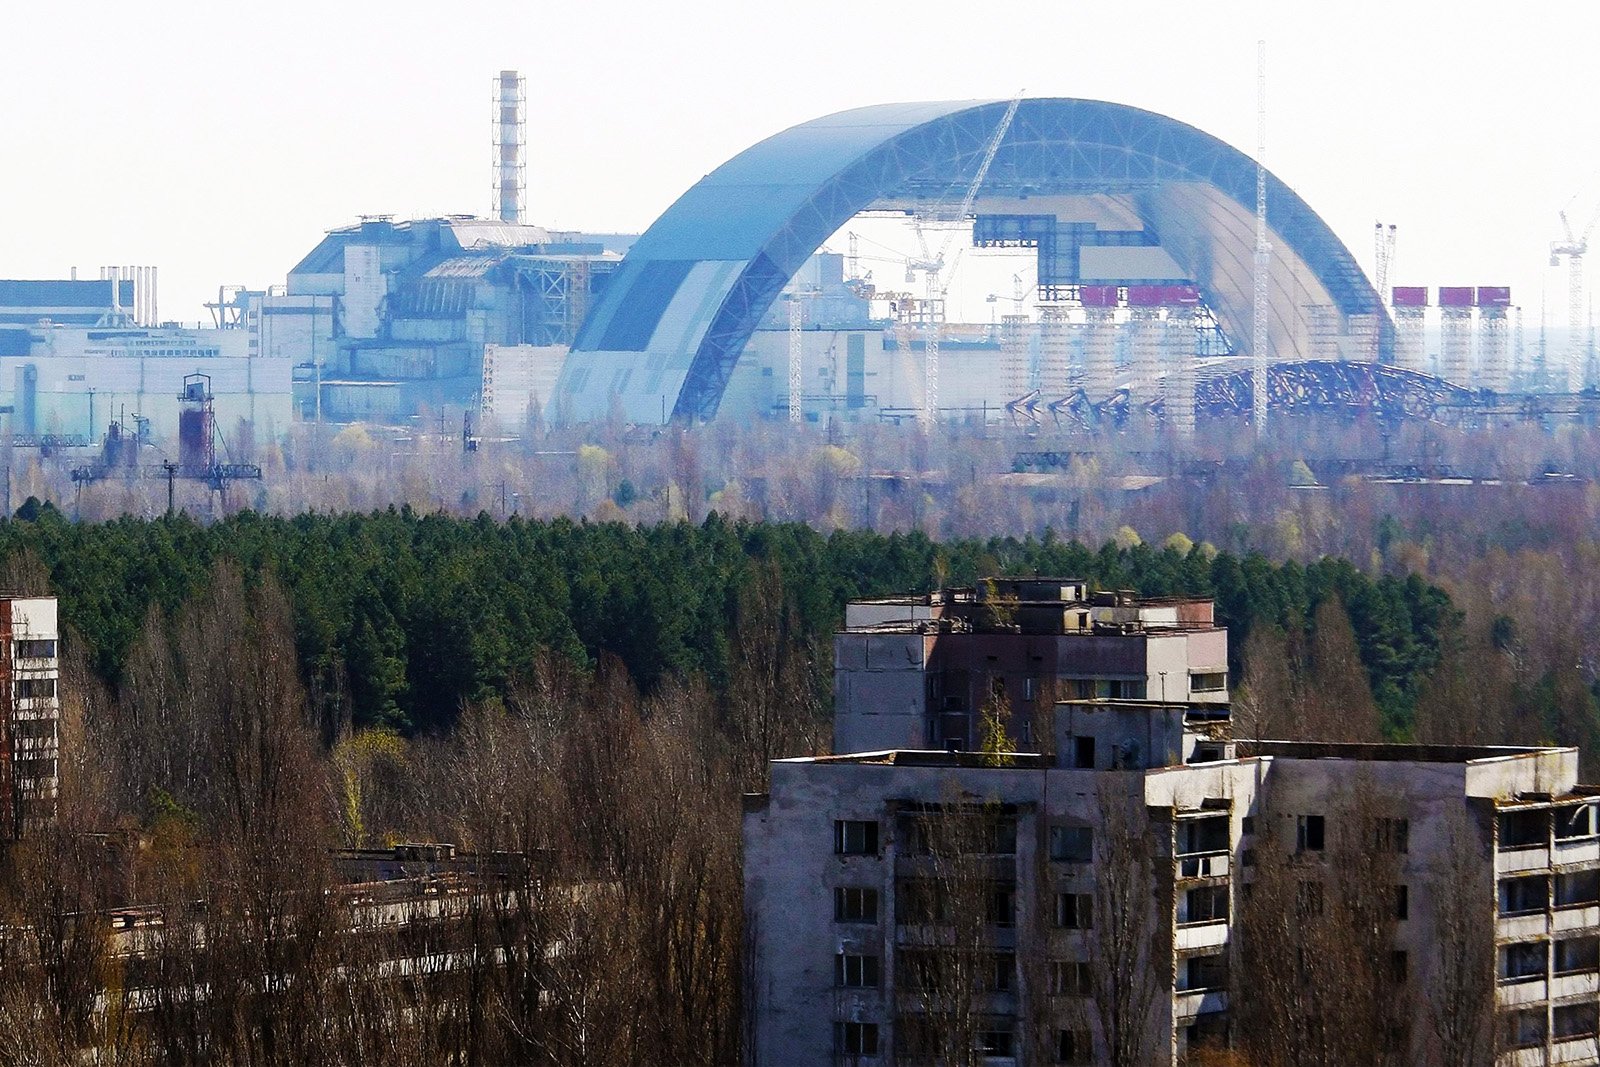 How to see the Sarcophagus in Chernobyl